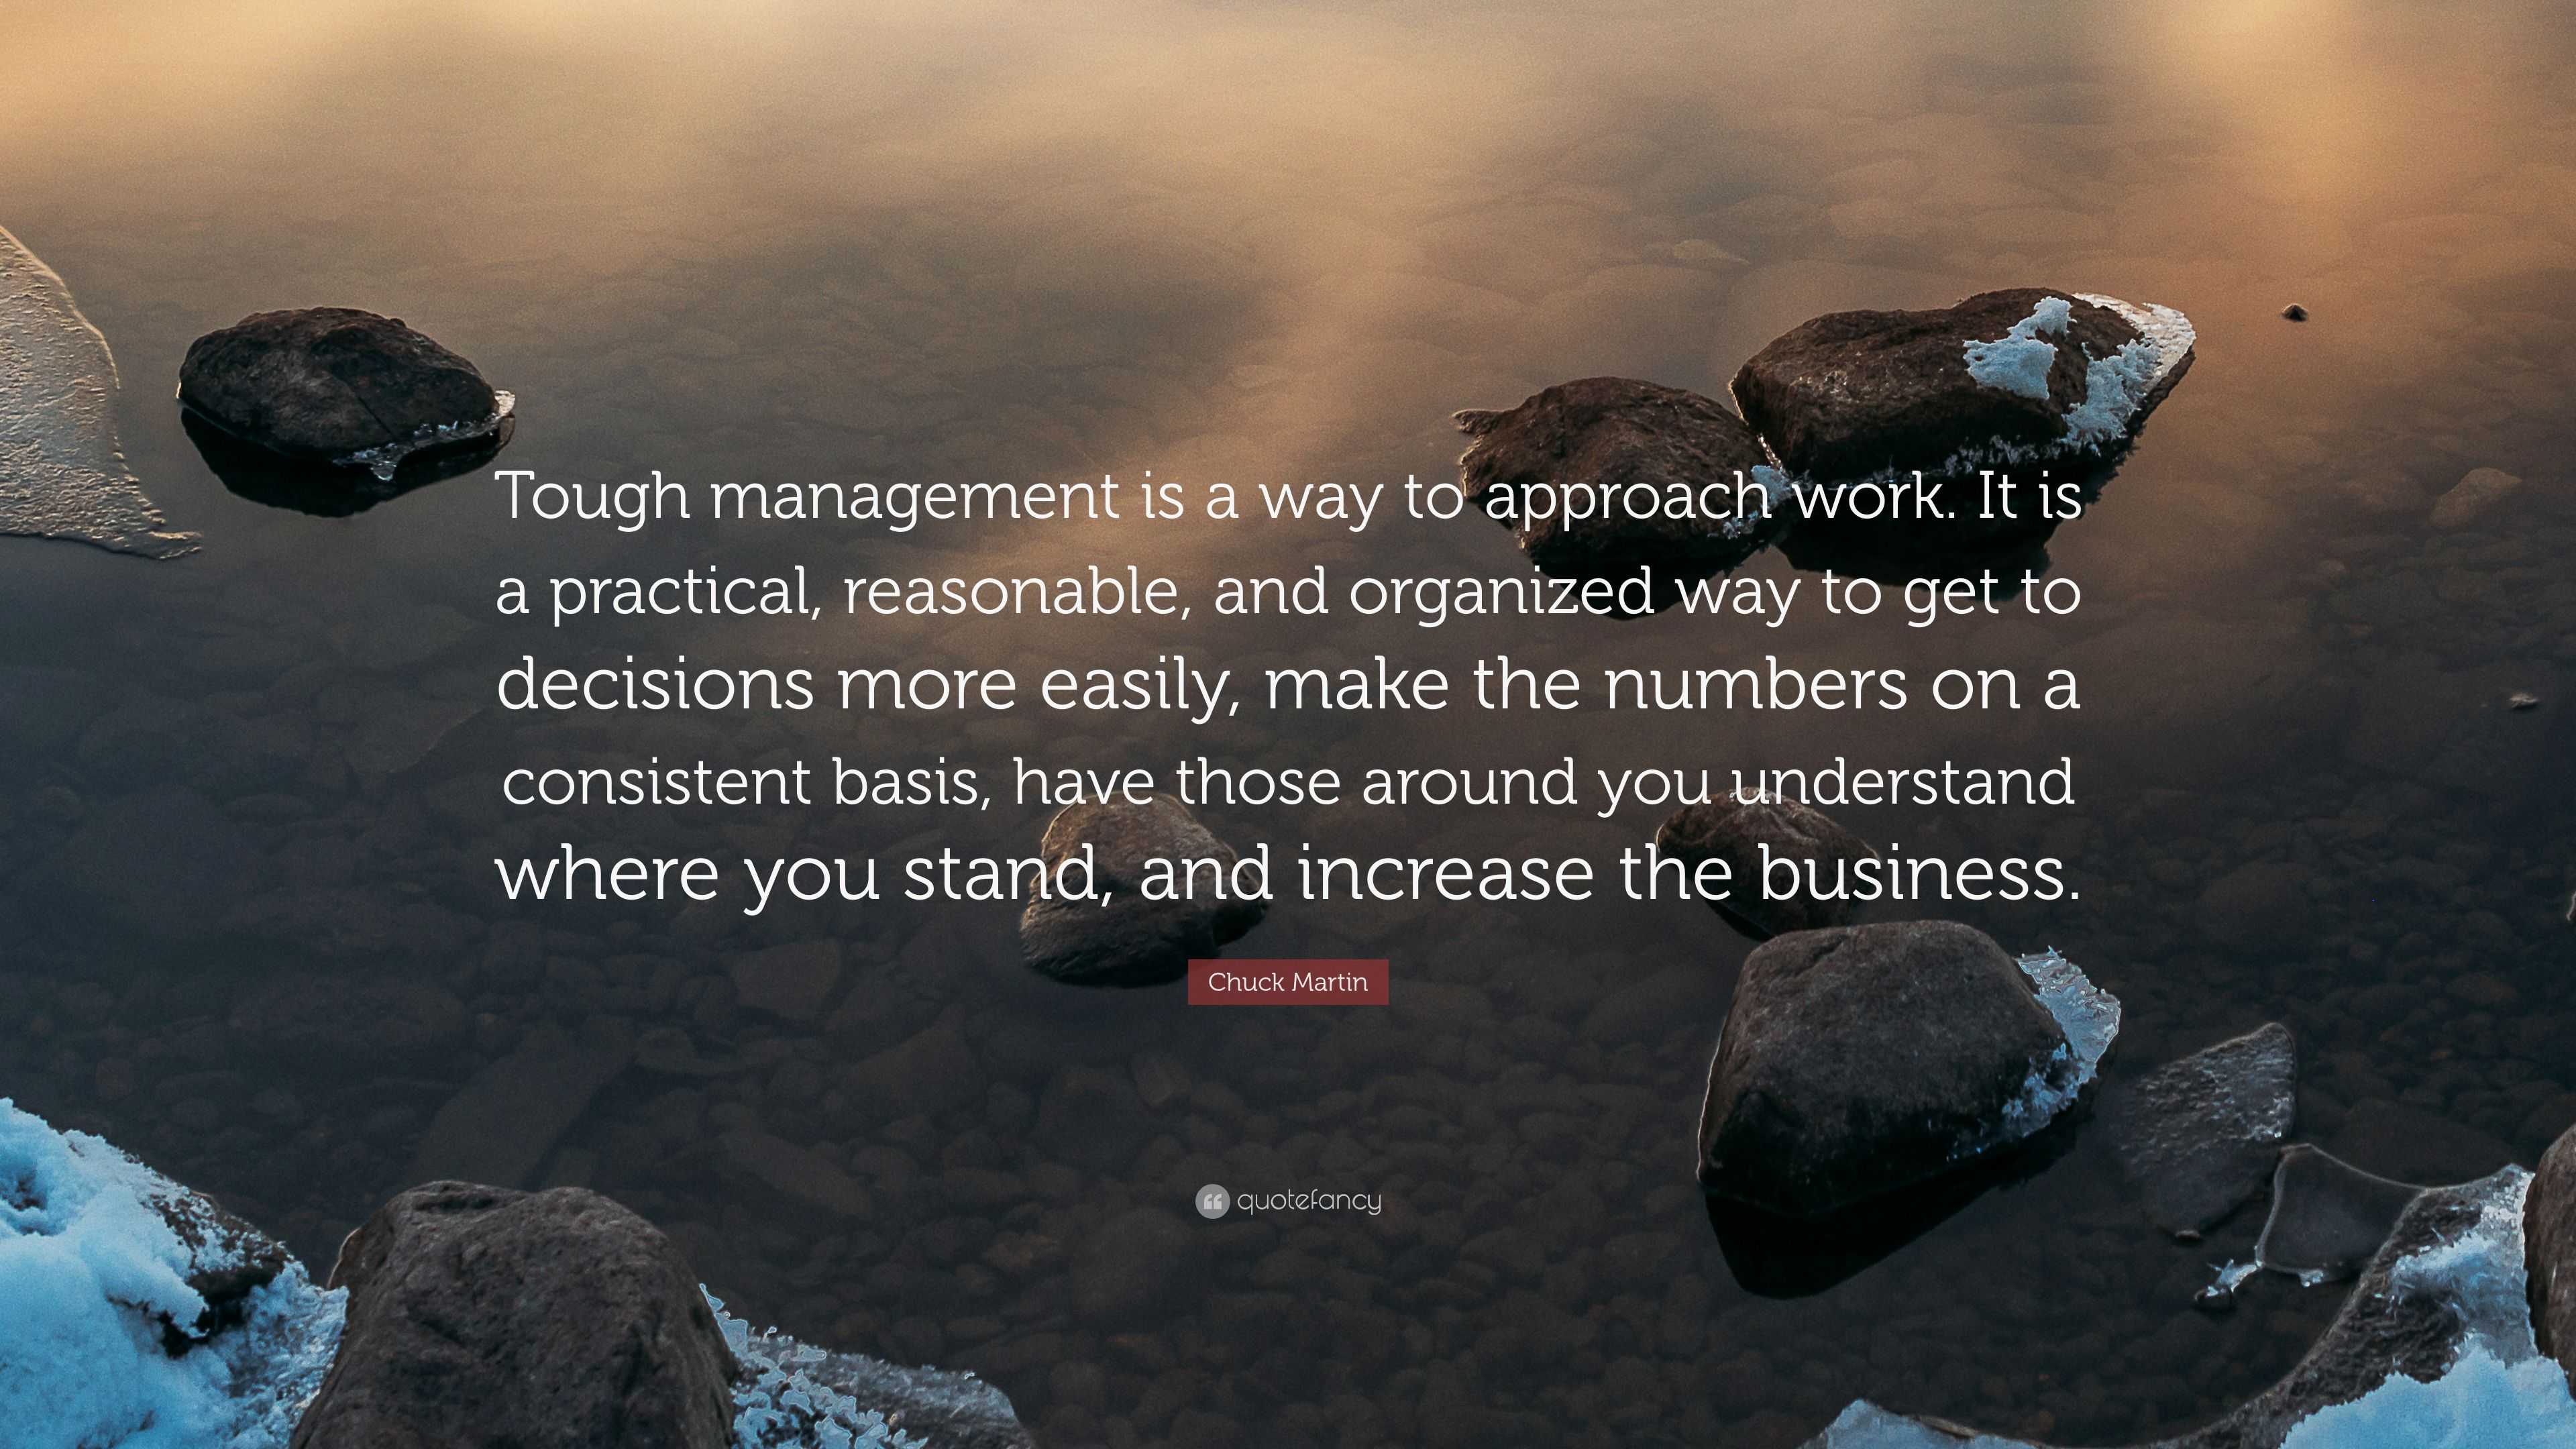 Chuck Martin Quote: “Tough management is a way to approach work ...